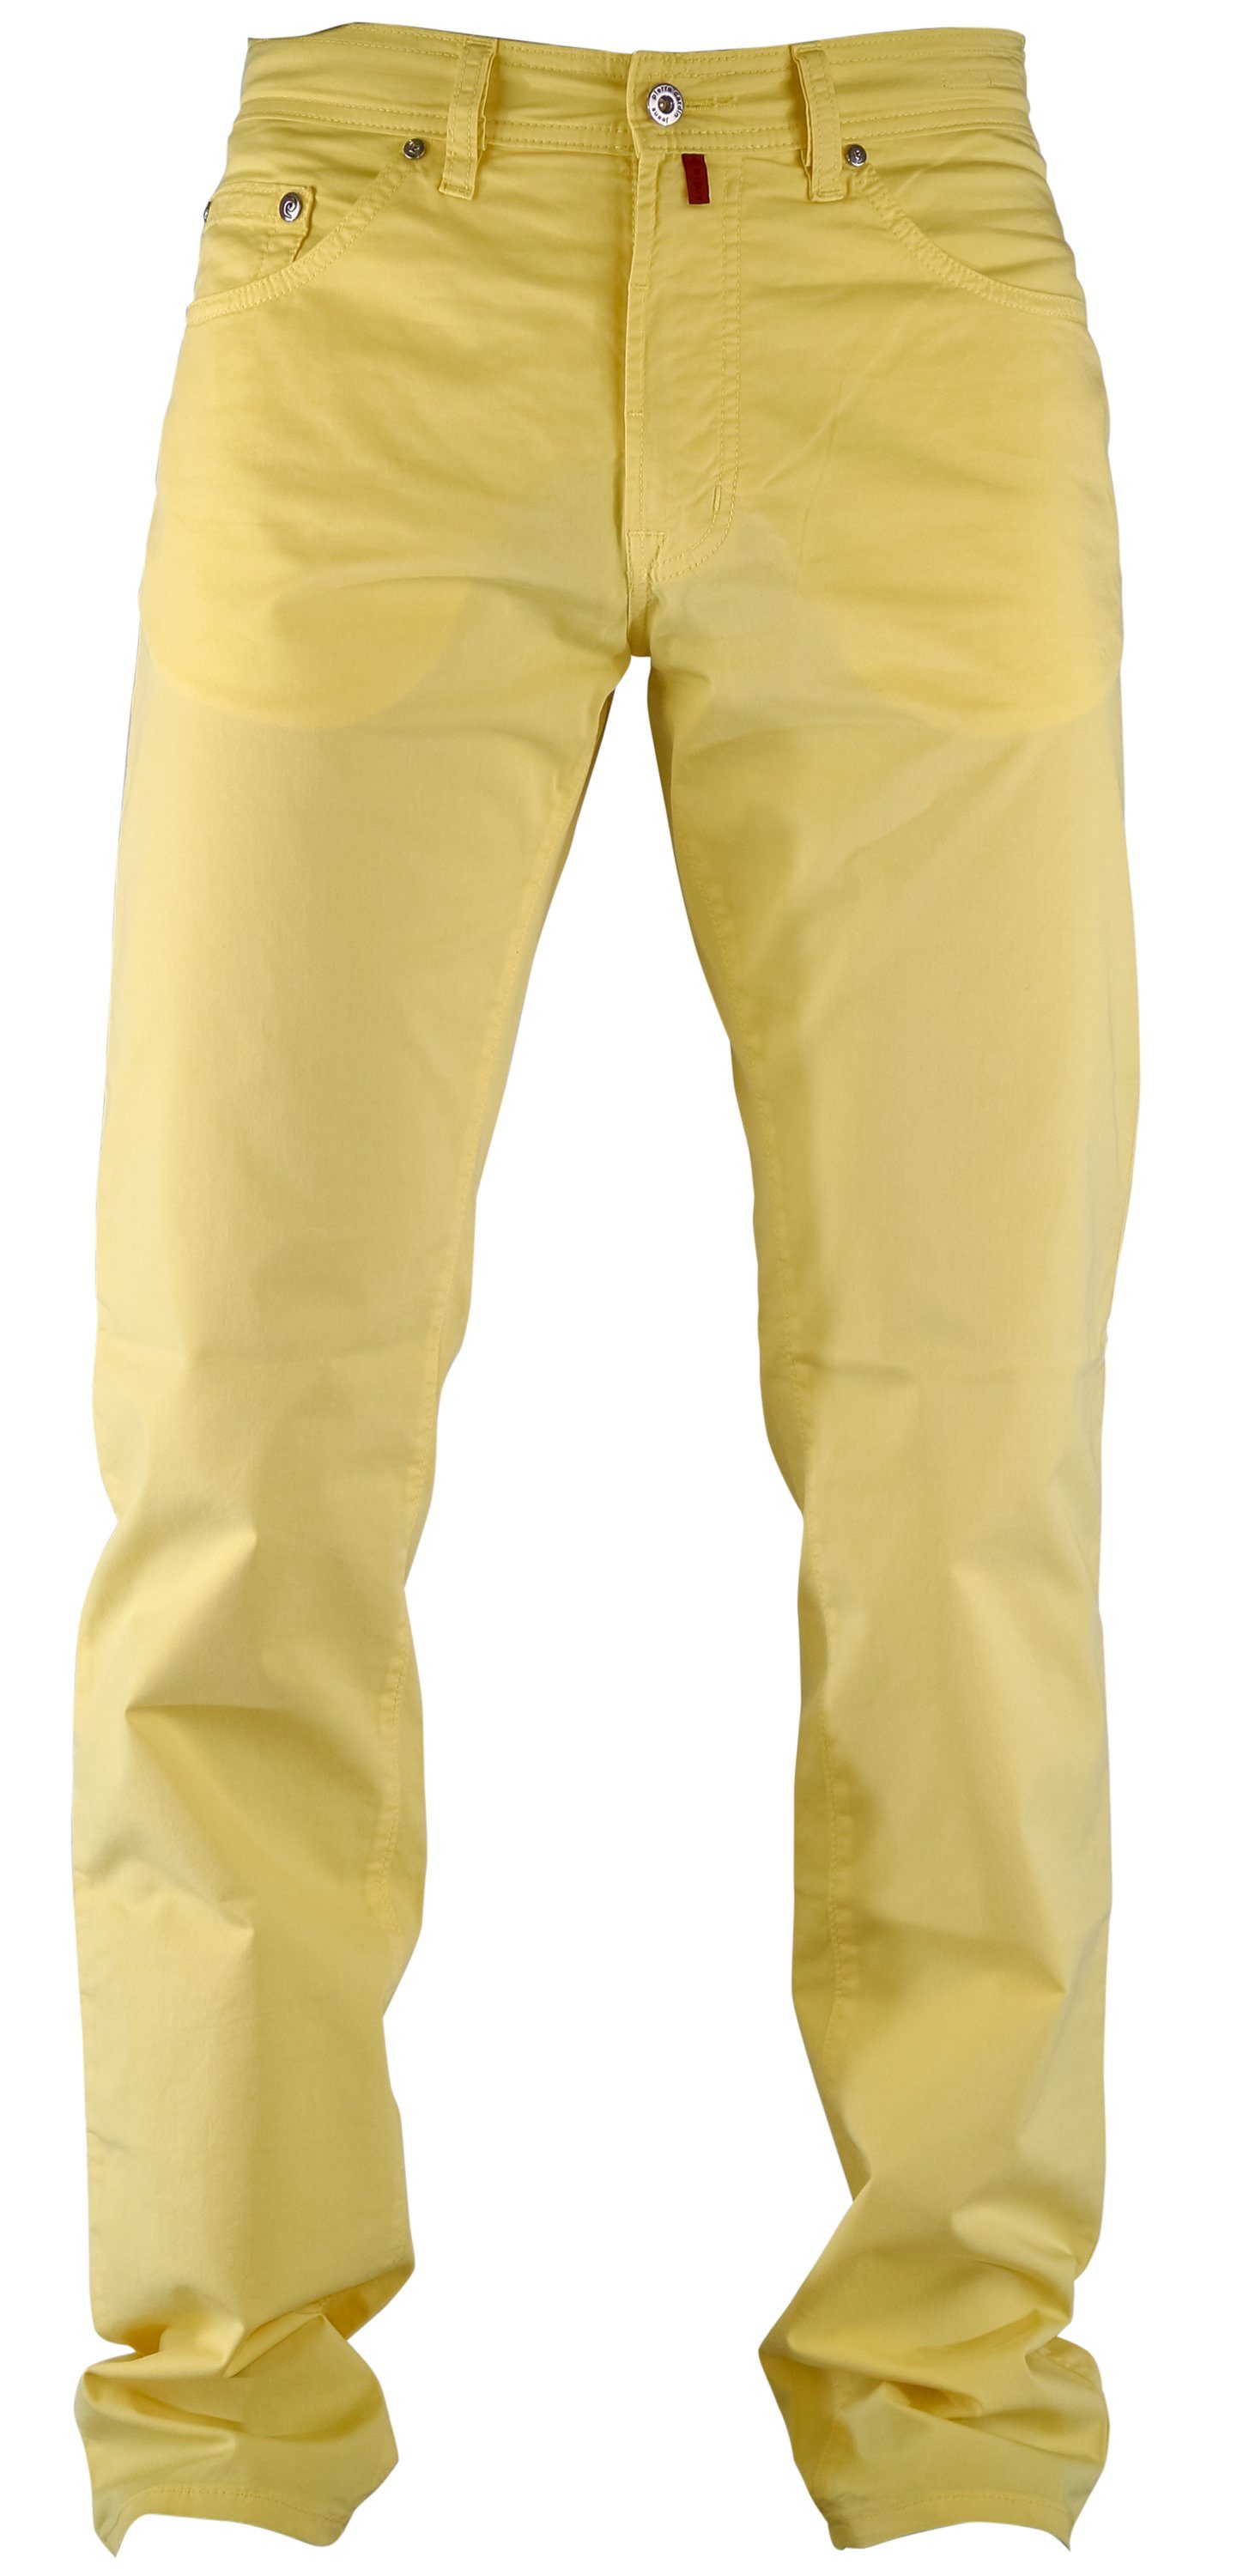 Pierre Cardin 5-Pocket-Jeans PIERRE CARDIN DEAUVILLE summer air touch sunny yellow 3196 444.48